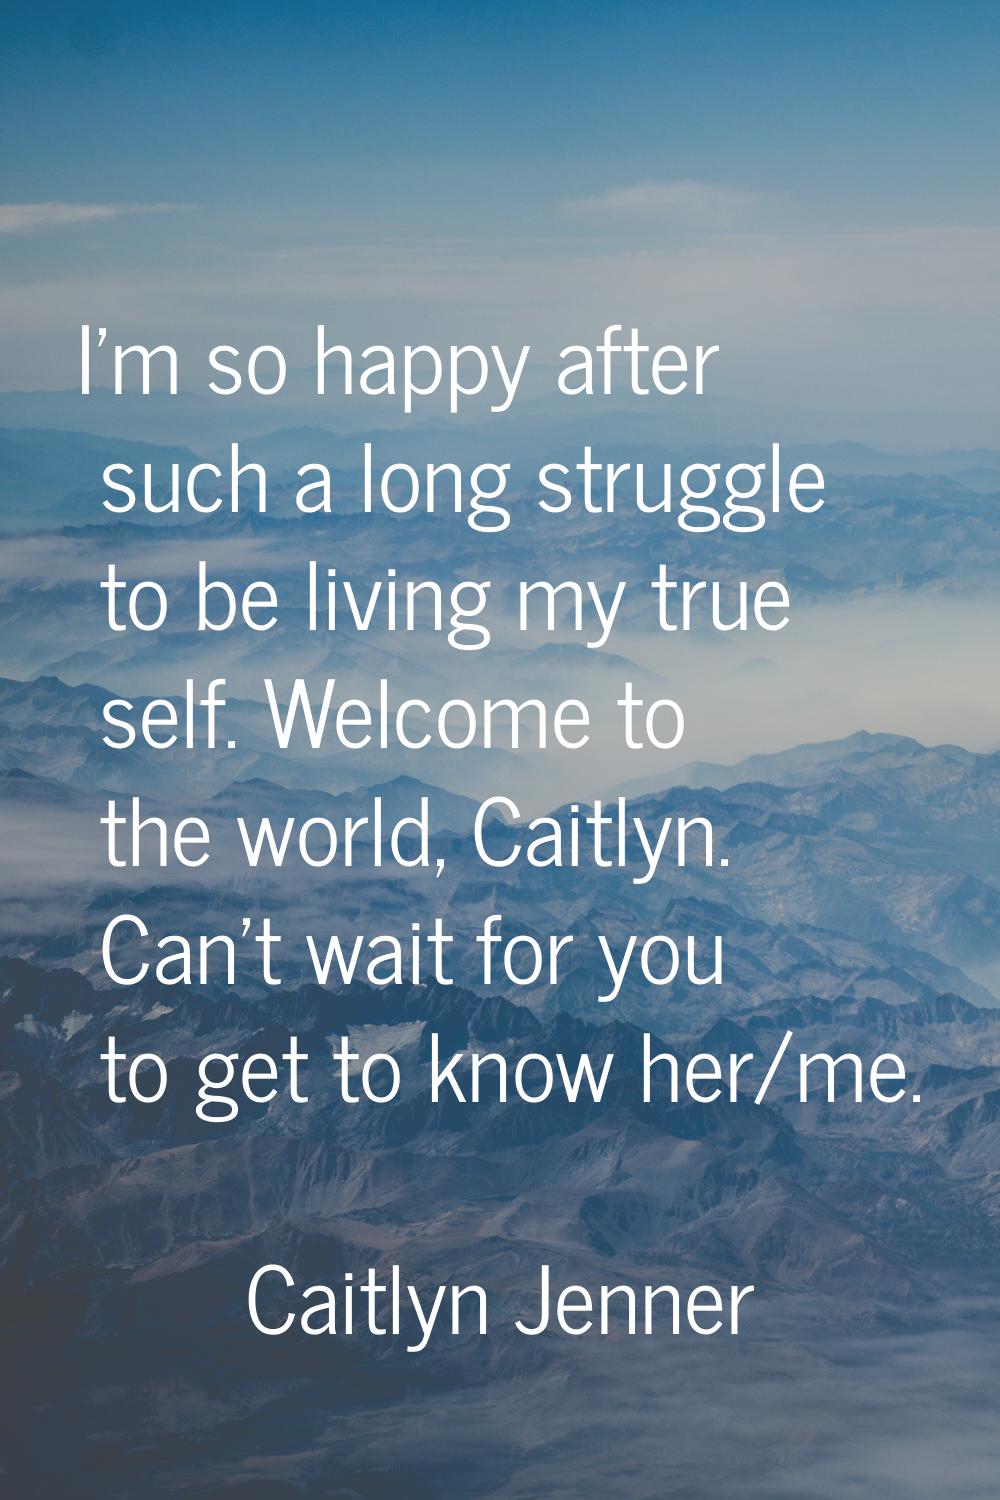 I'm so happy after such a long struggle to be living my true self. Welcome to the world, Caitlyn. C